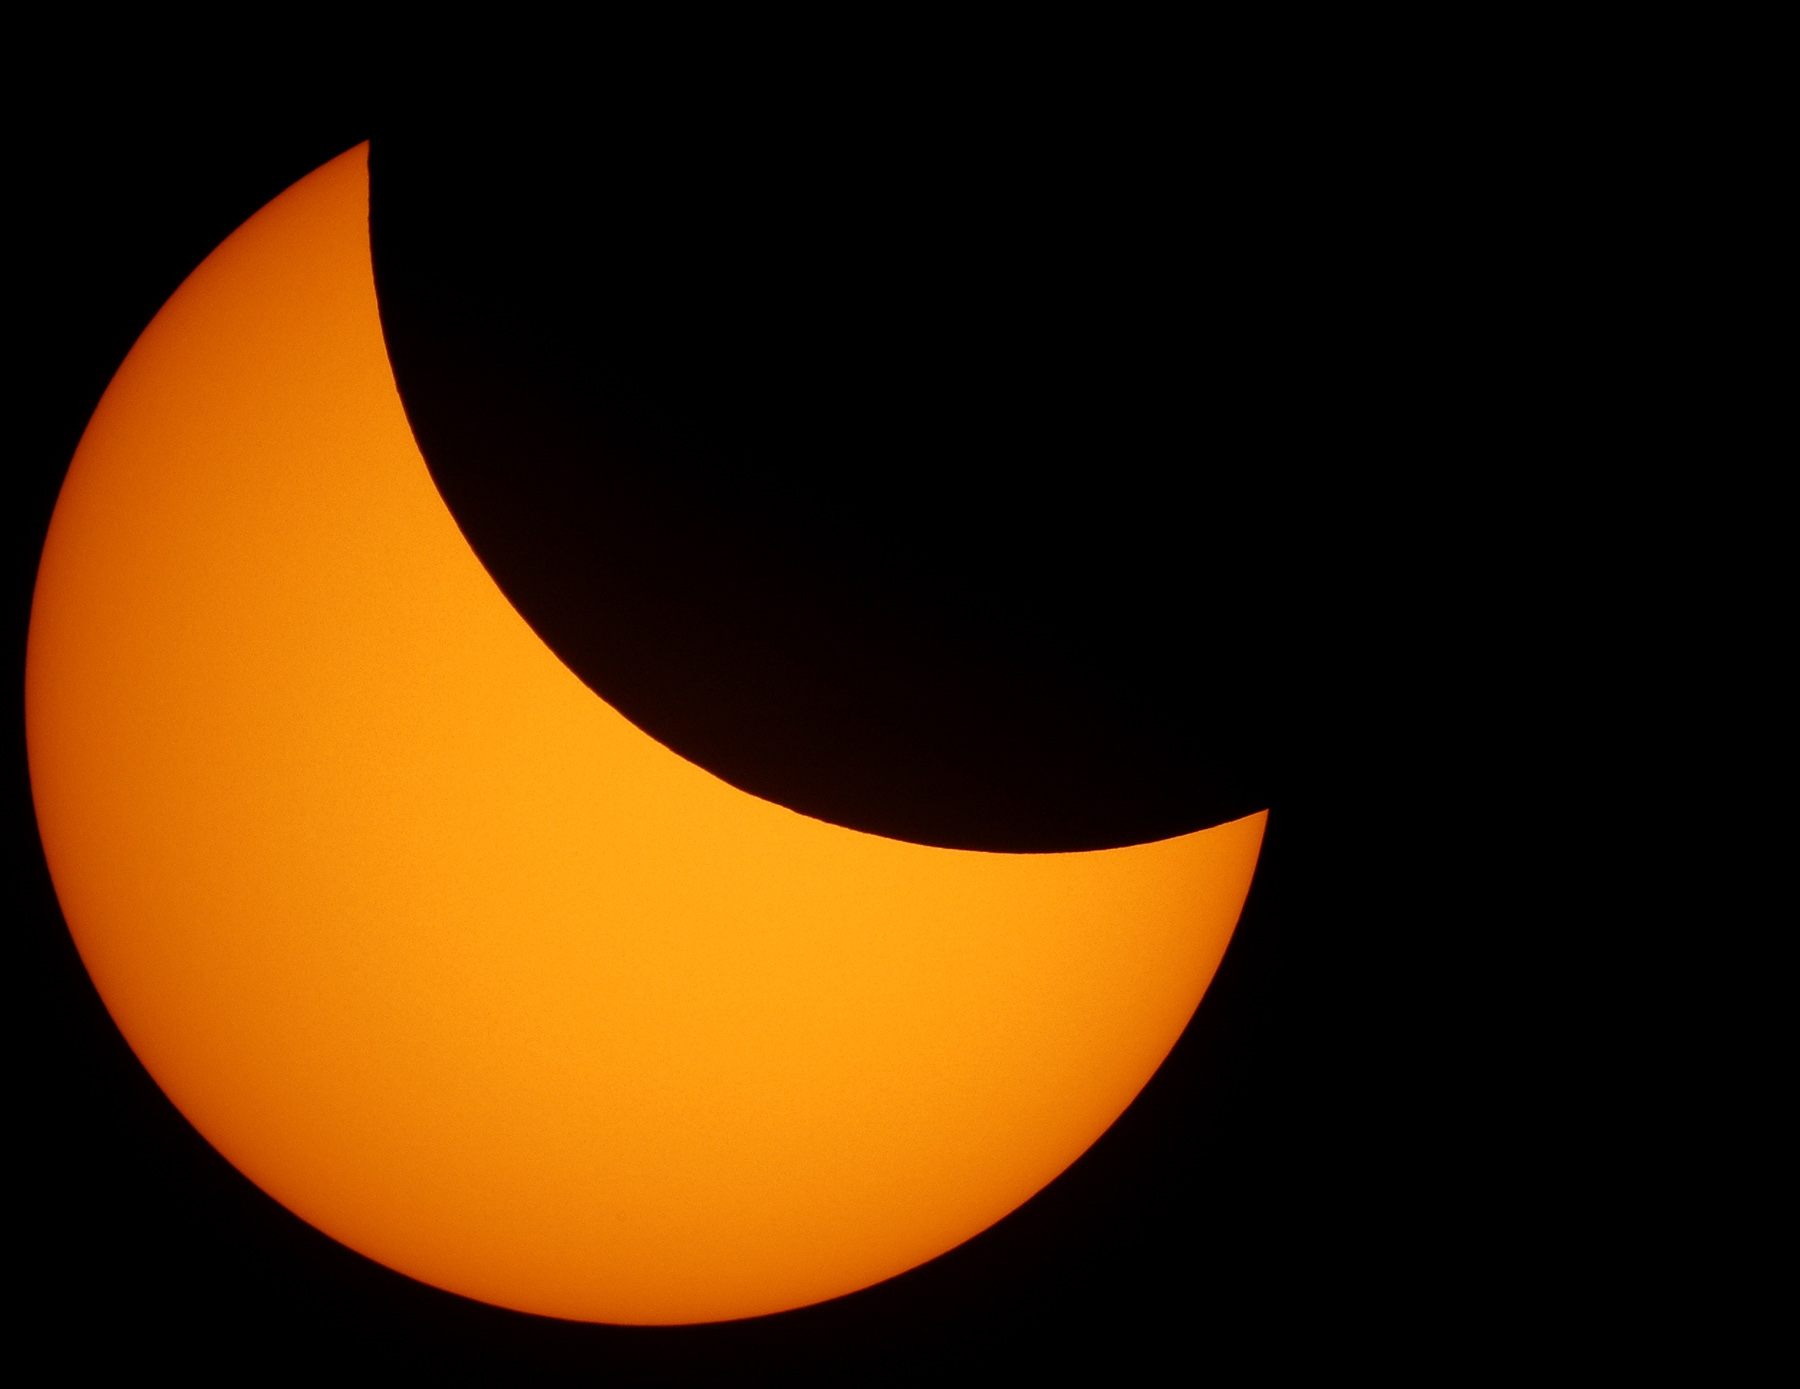 Eclipse 2017 - A88 - Partial Eclipse at 30 minutes after Totality